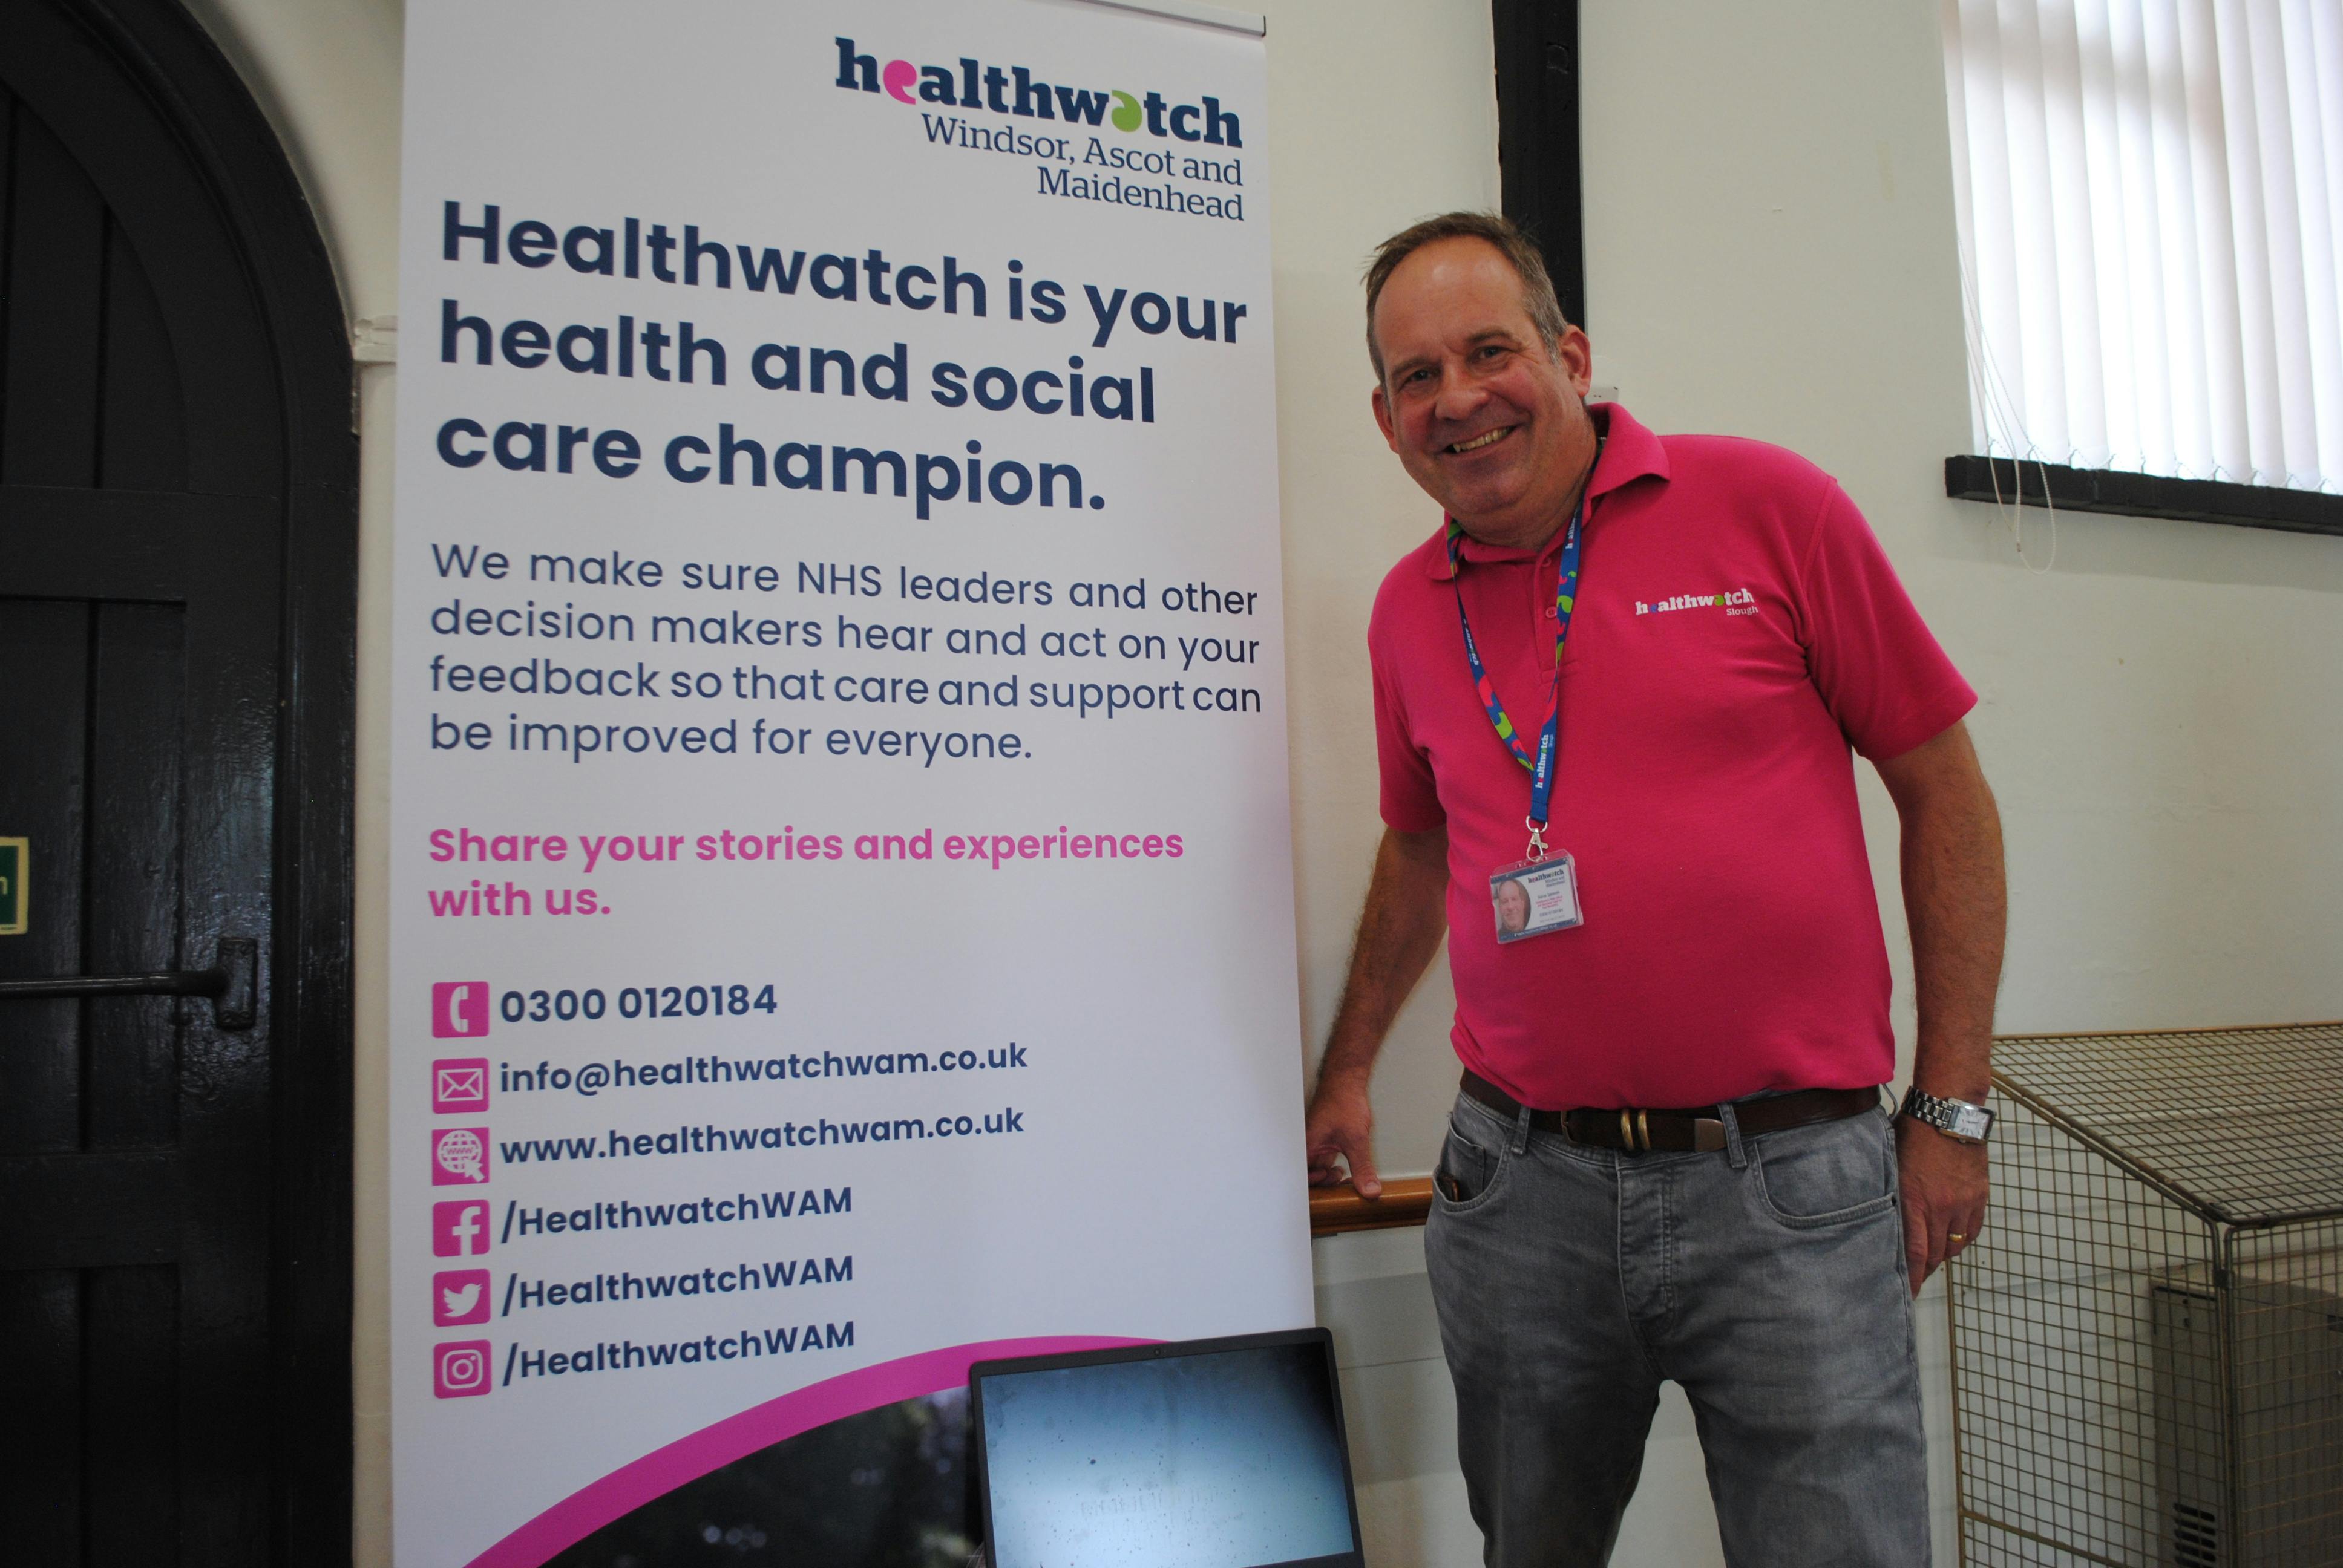 Healthwatch at South Ascot World Cafe